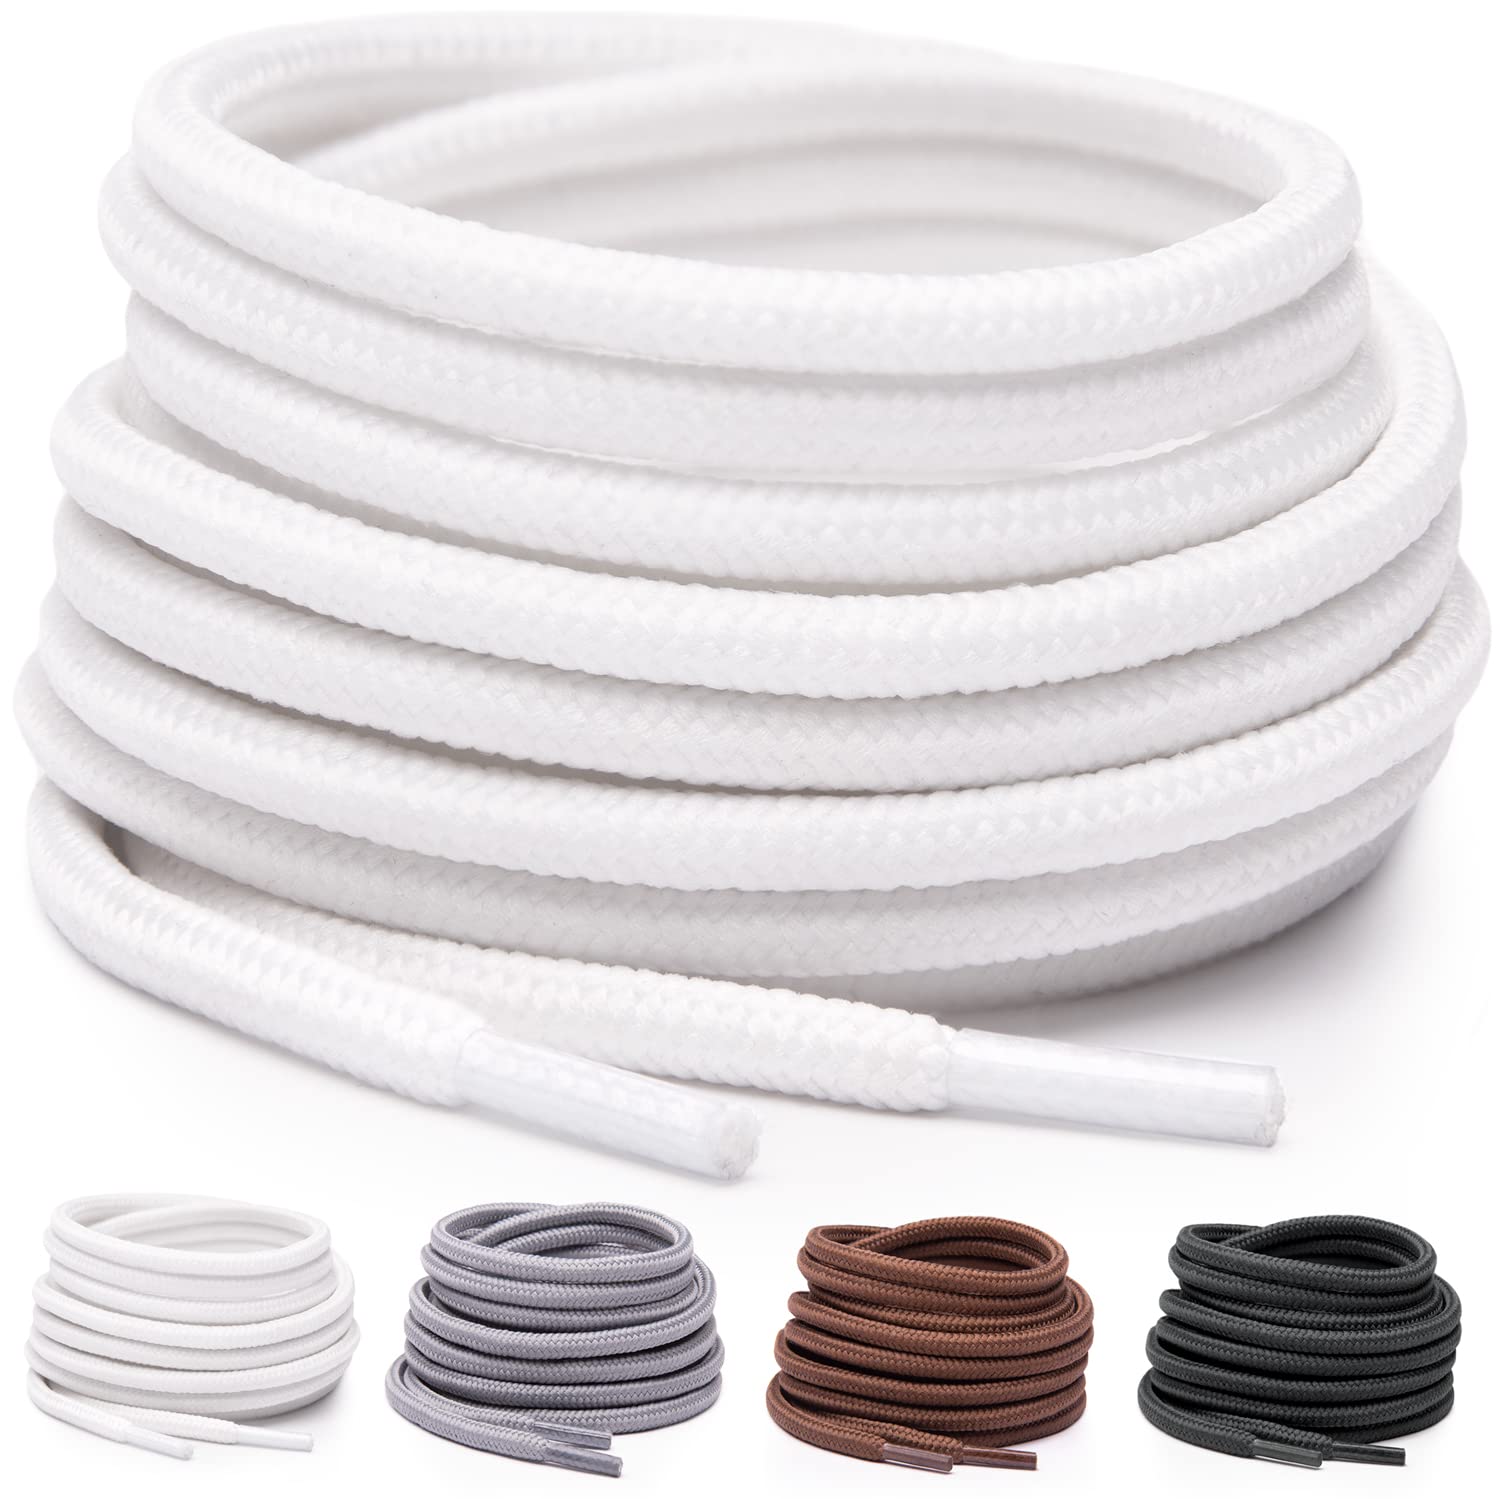 Miscly Round Shoelaces 1 Pair] 532 Thick - For Shoes, Sneakers  Boots (27, White)